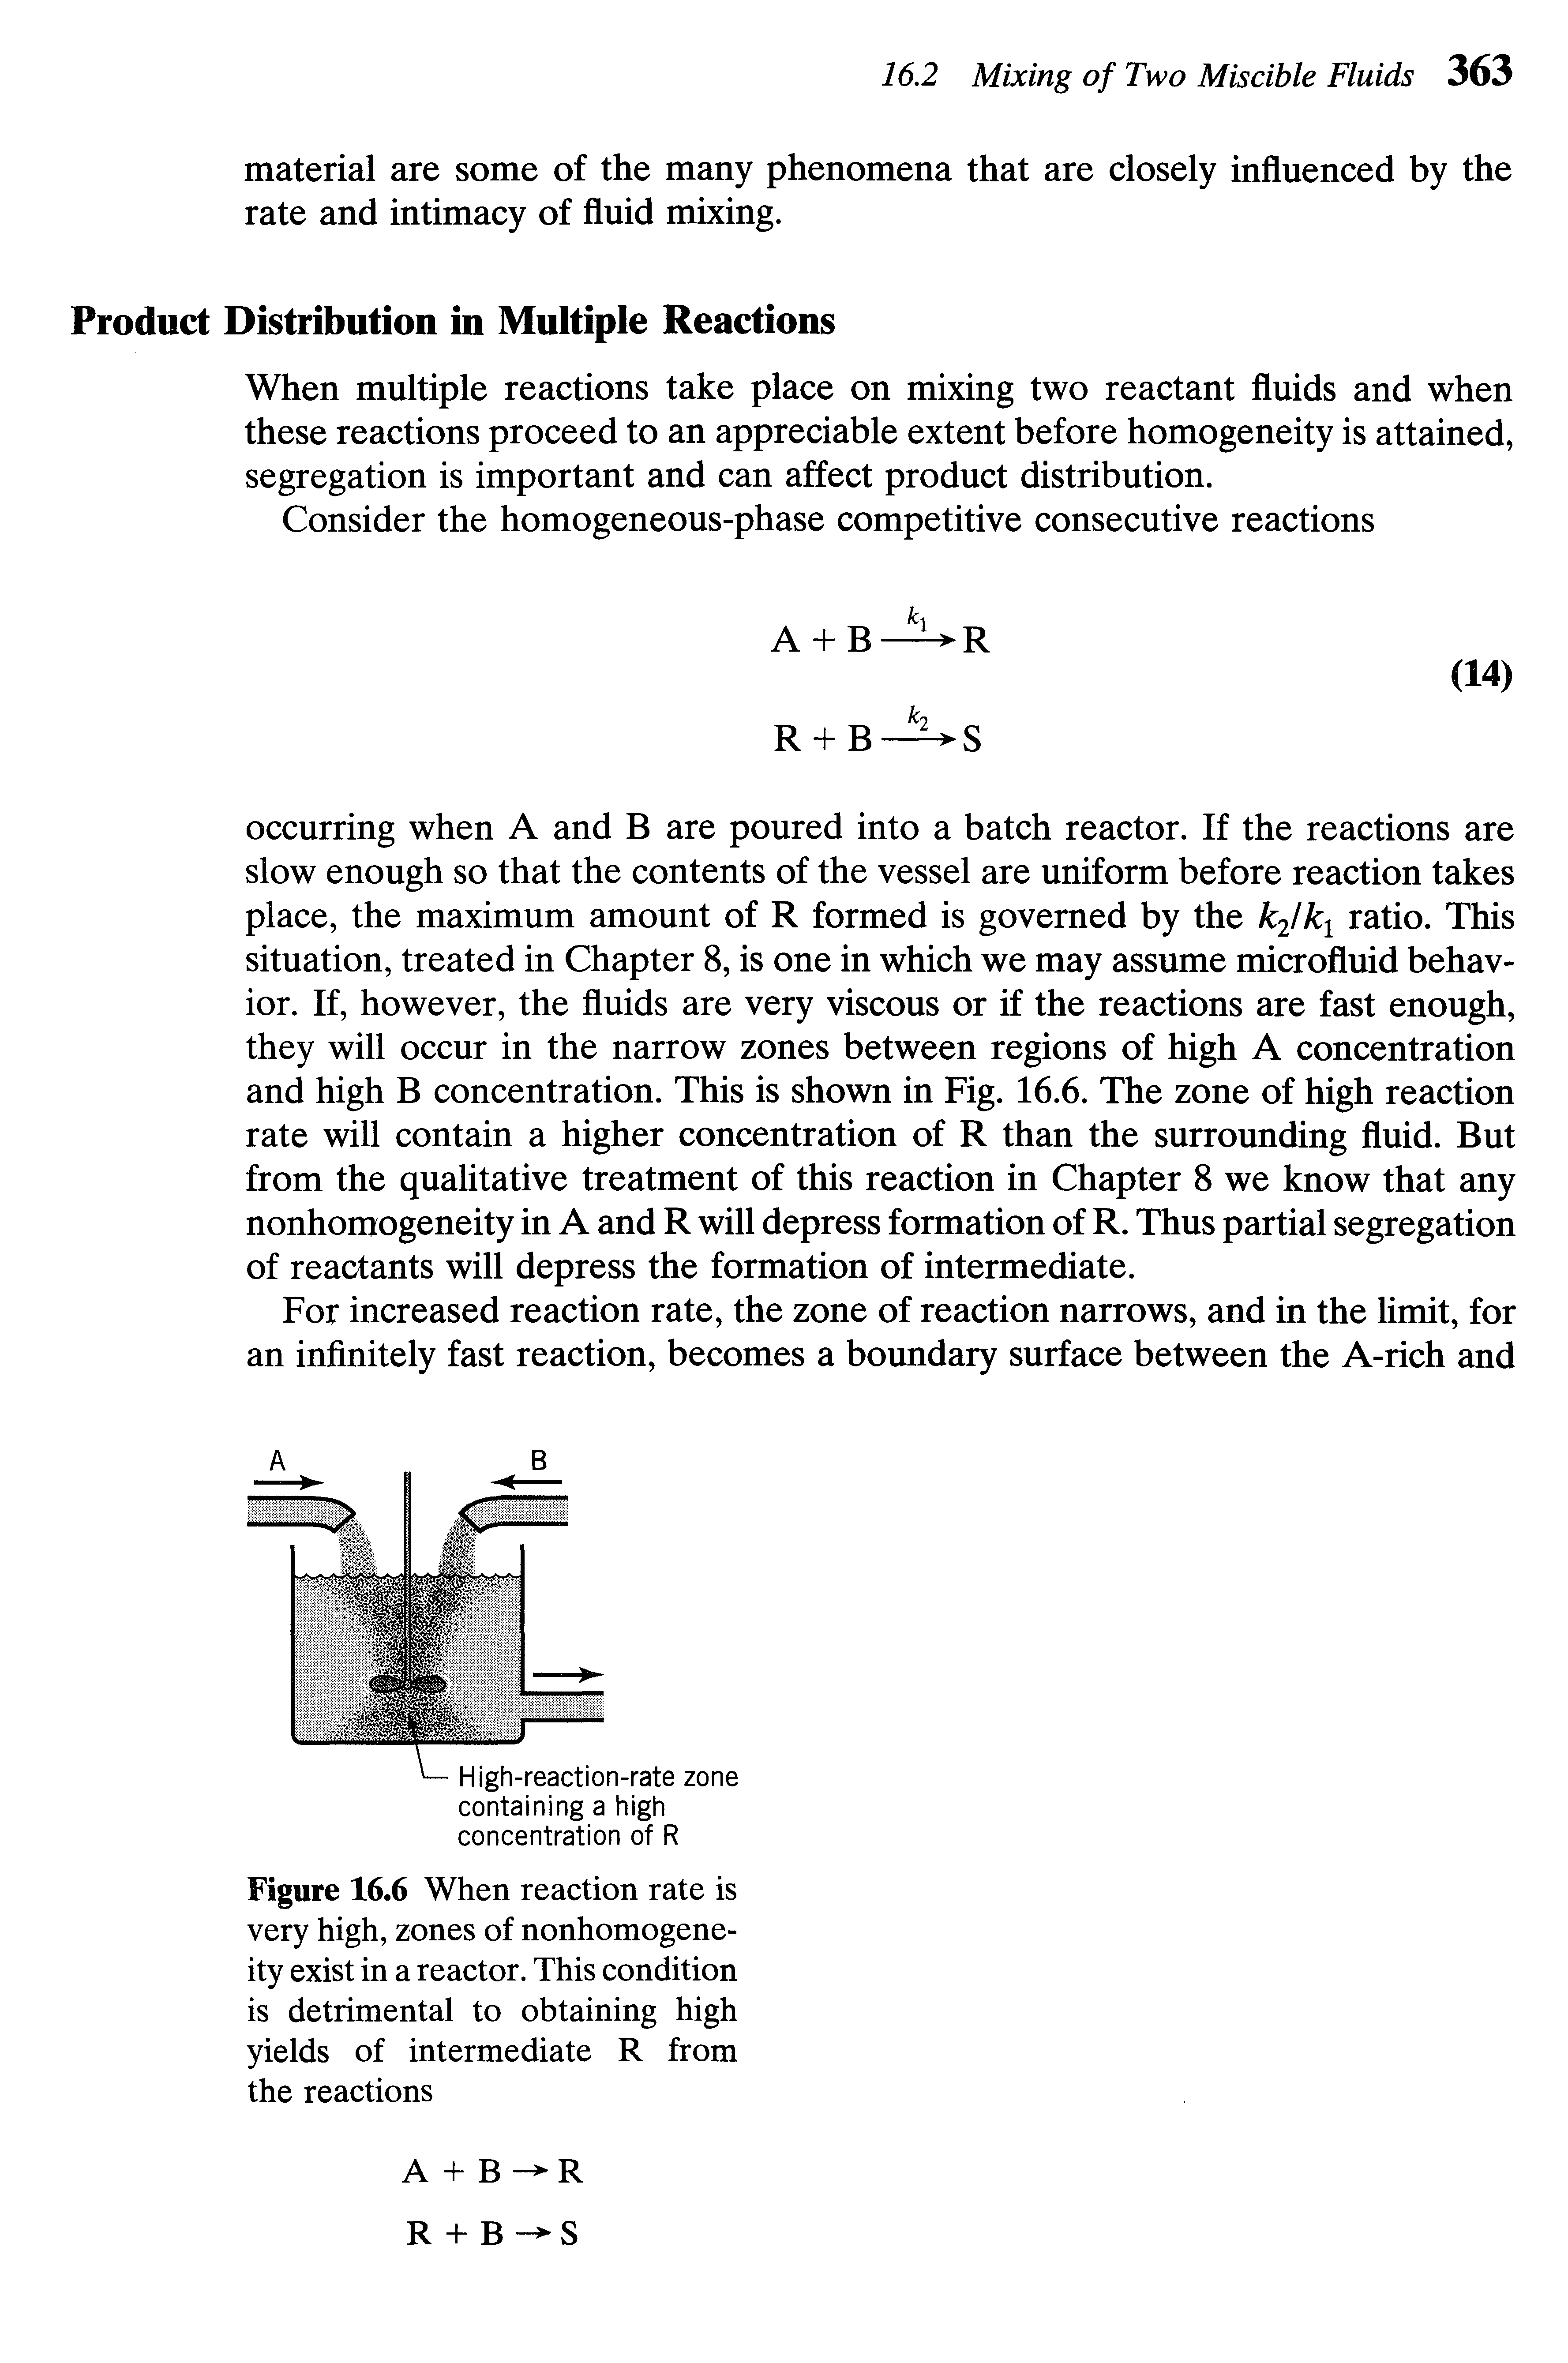 Figure 16.6 When reaction rate is very high, zones of nonhomogeneity exist in a reactor. This condition is detrimental to obtaining high yields of intermediate R from the reactions...